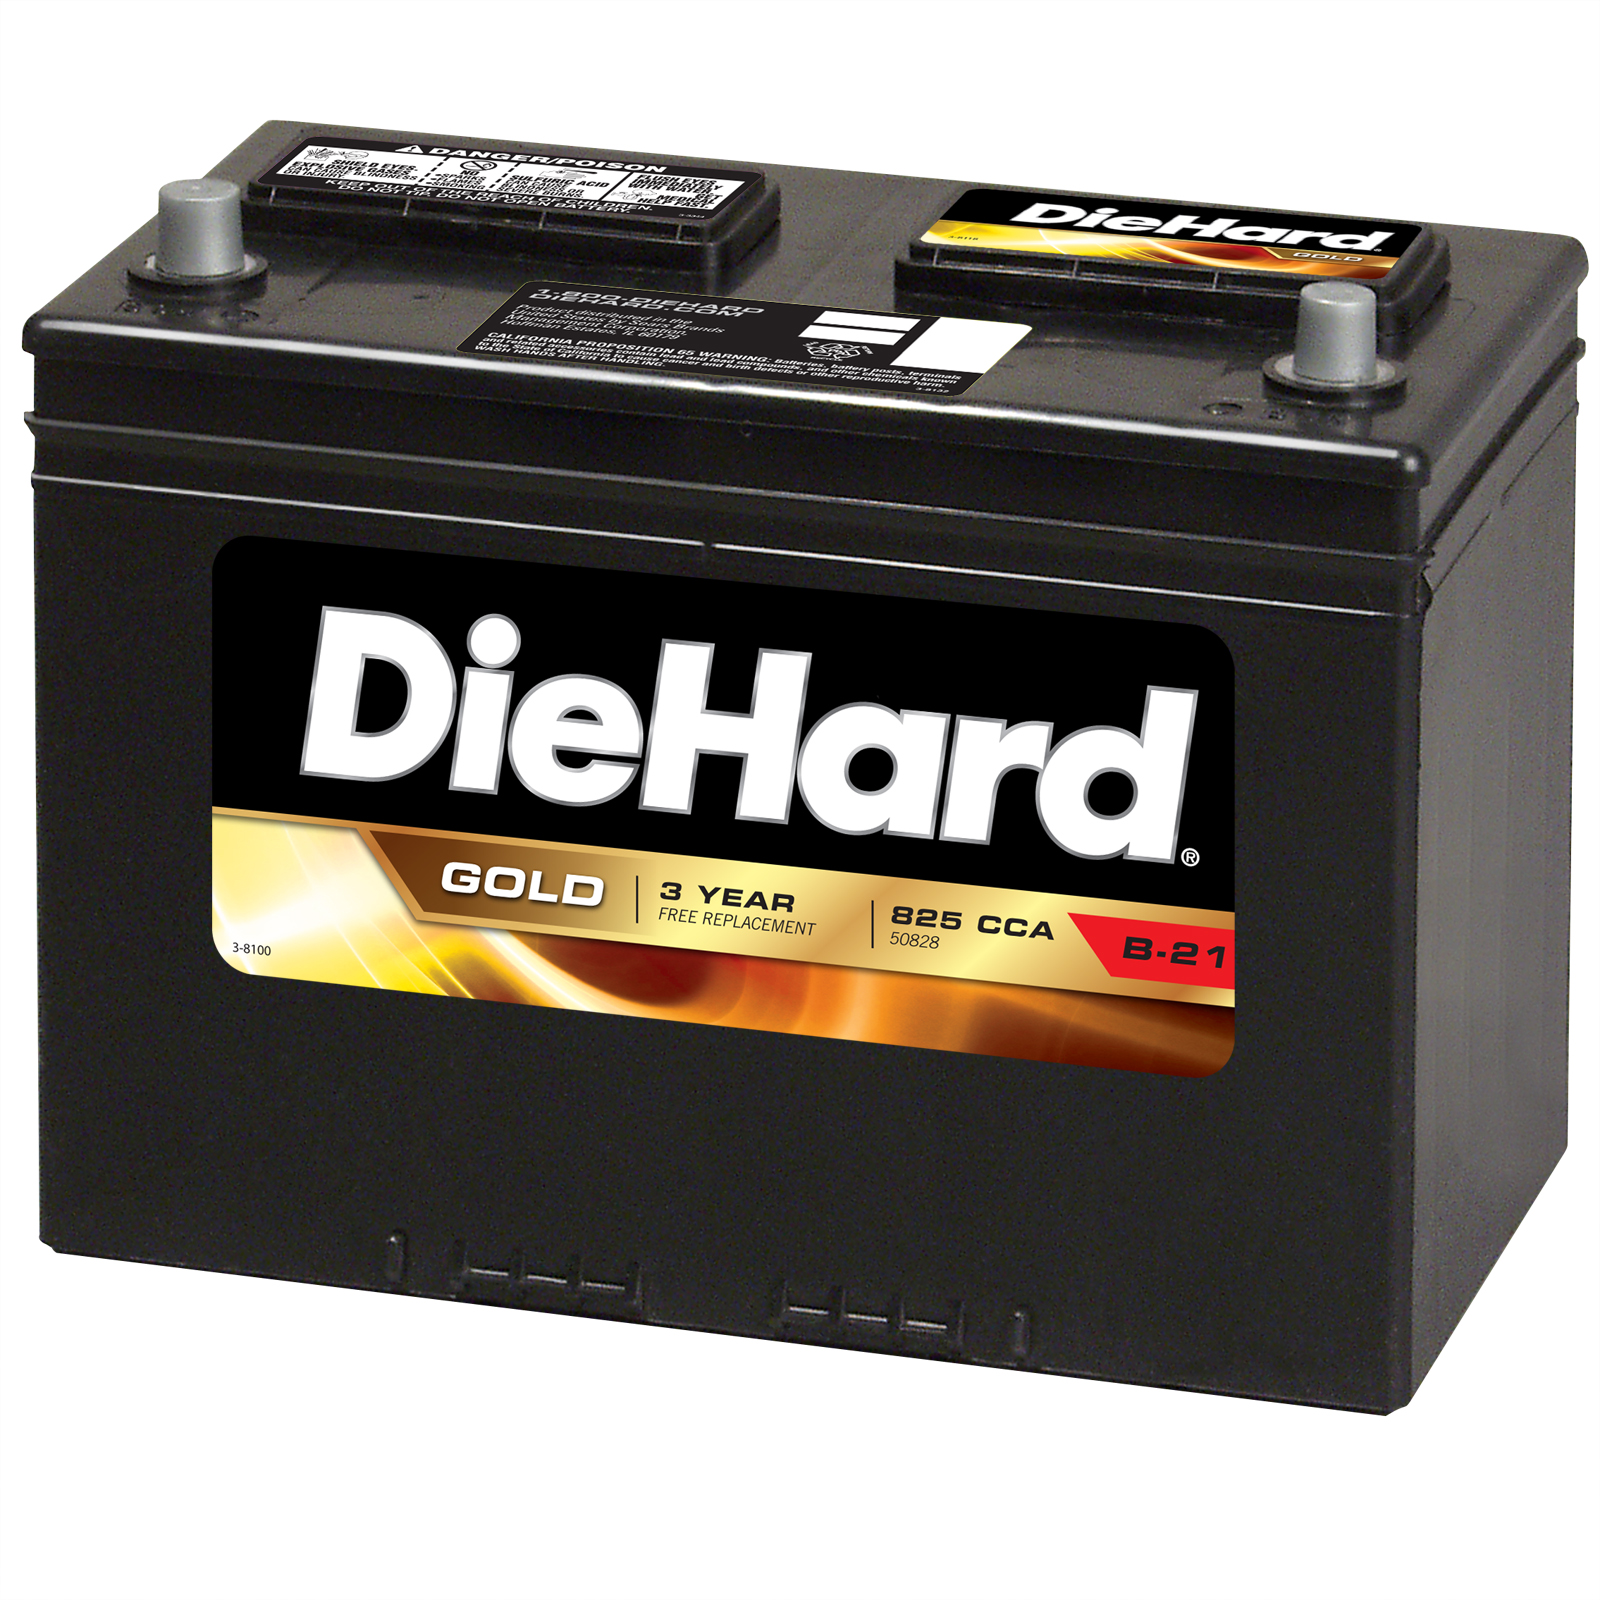 DieHard Gold Automotive Battery - Group Size EP-27F (Price with Exchange)